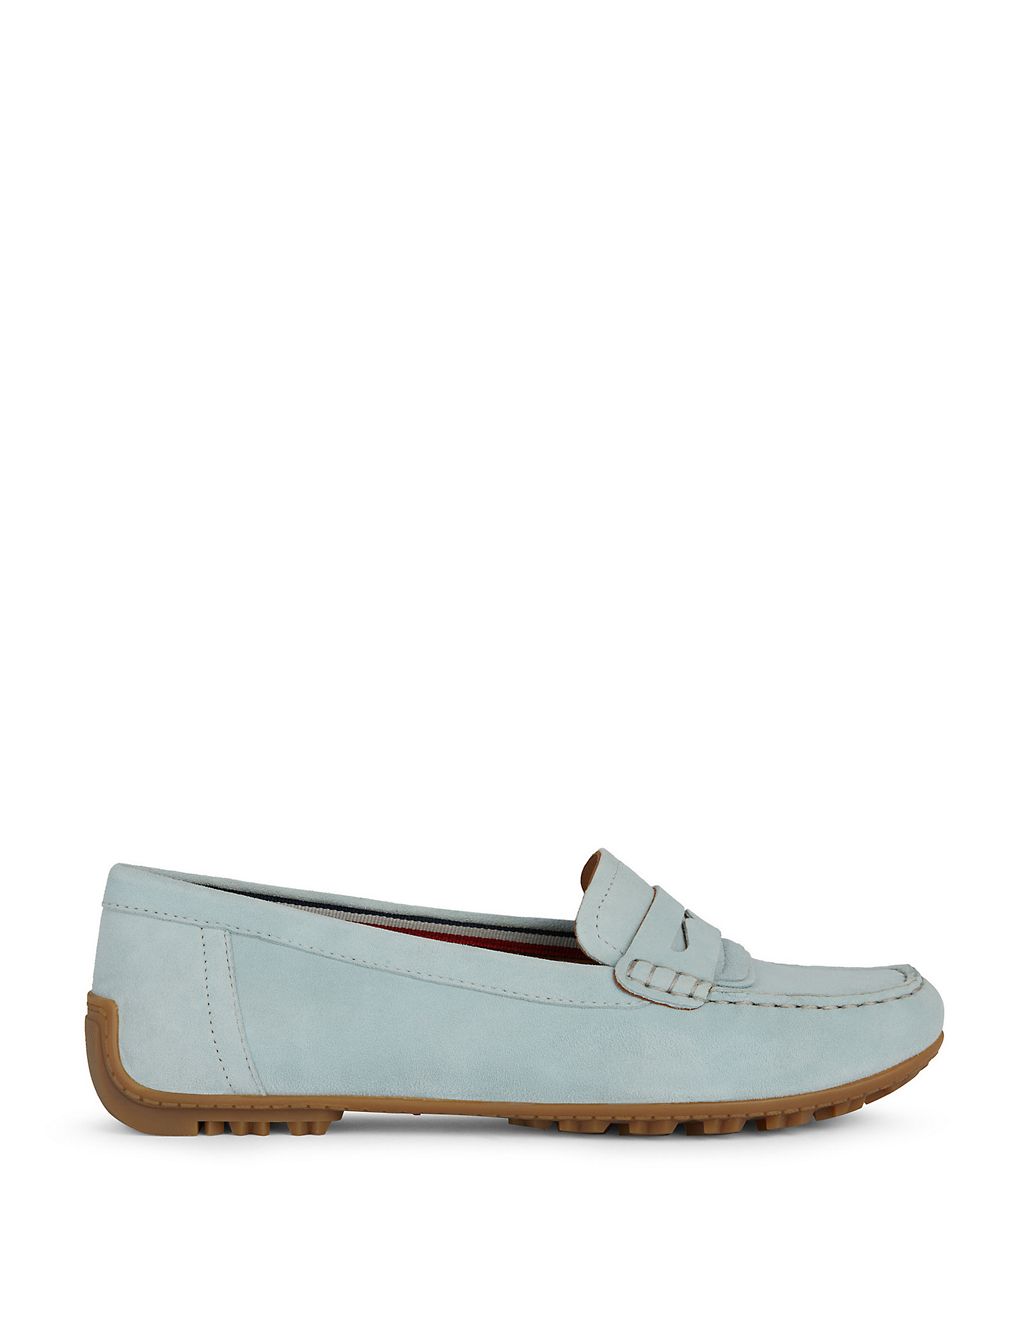 Suede Slip On Flat Loafers 3 of 6